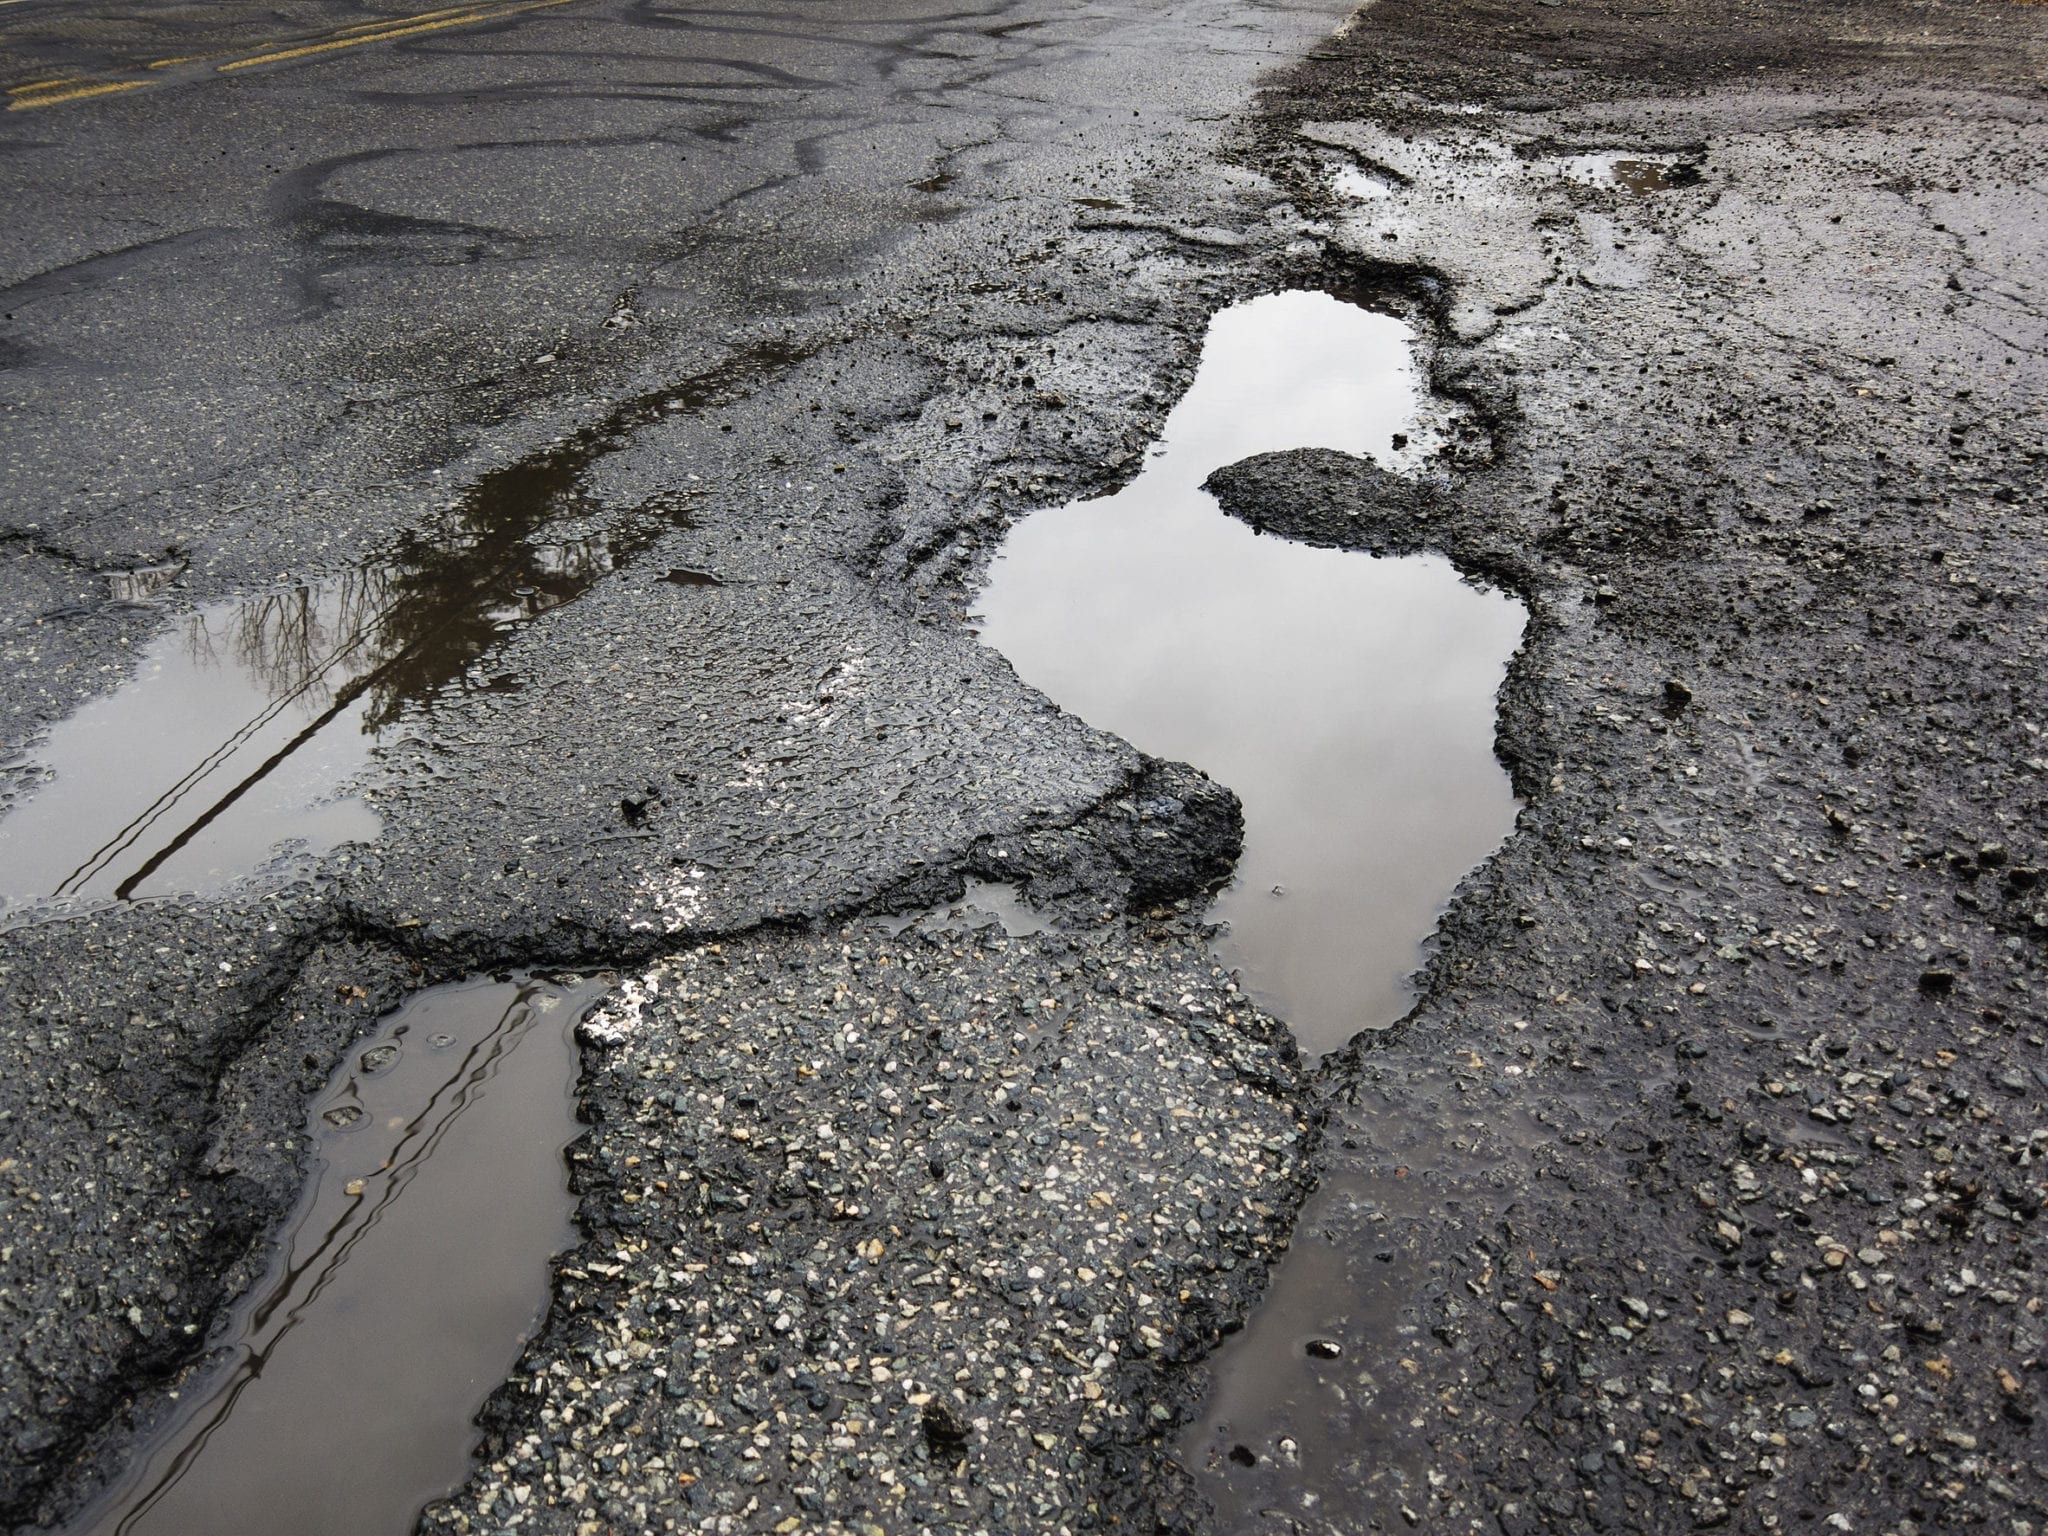 These Roadway Defects Commonly Cause Injuries in Florida